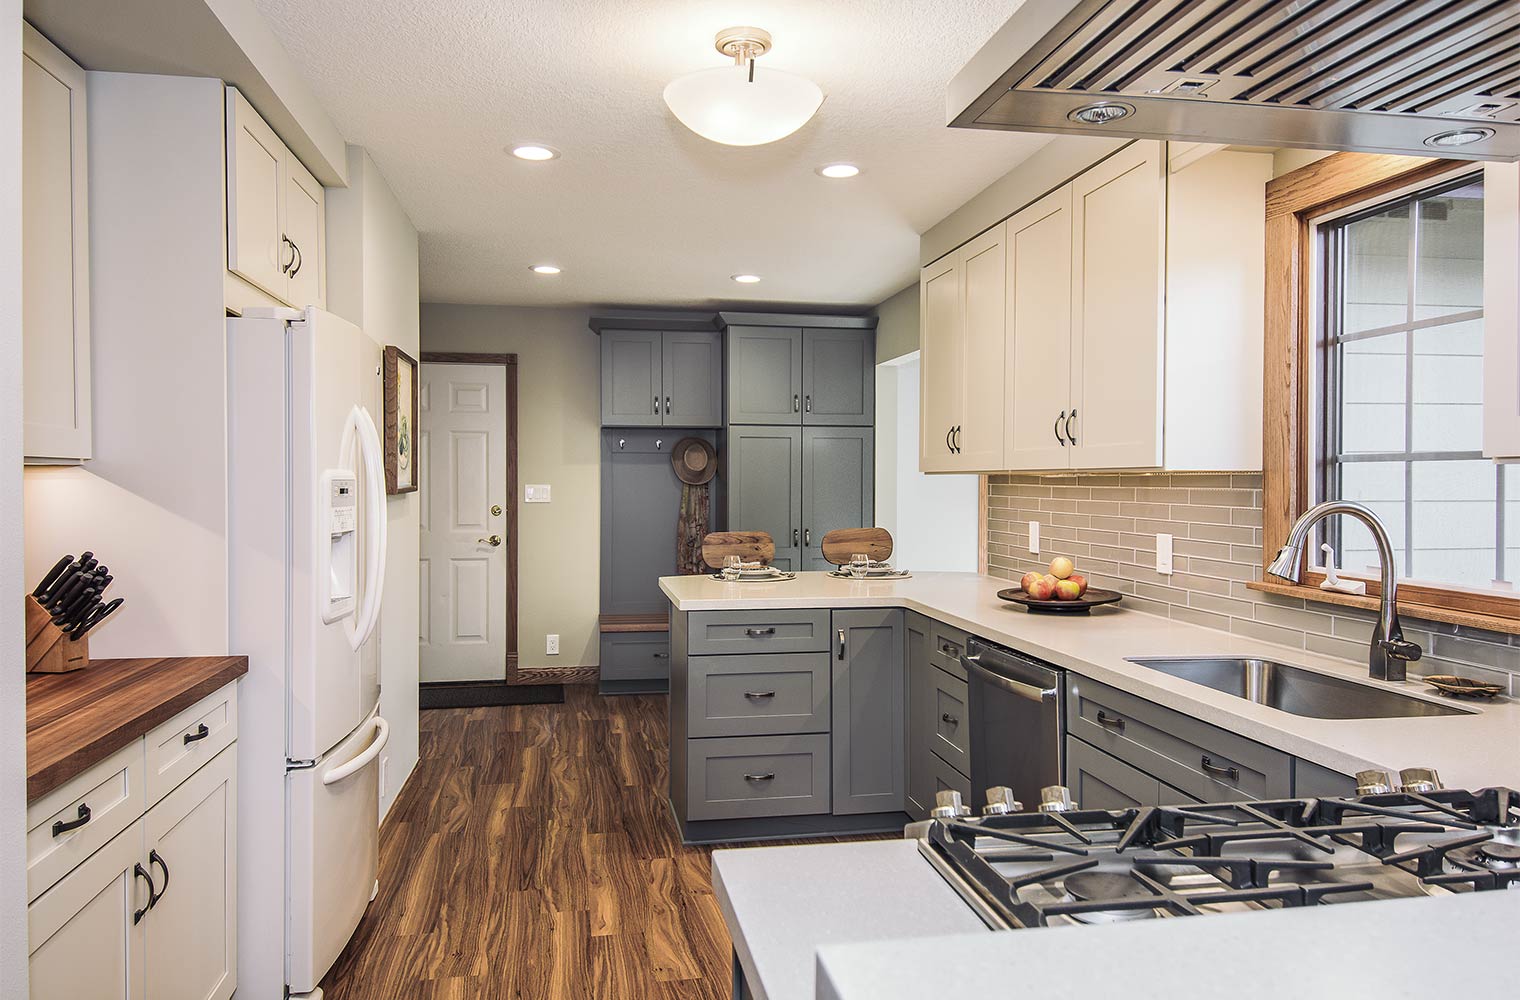 Renovating the Kitchen is the very first Home Renovation idea.